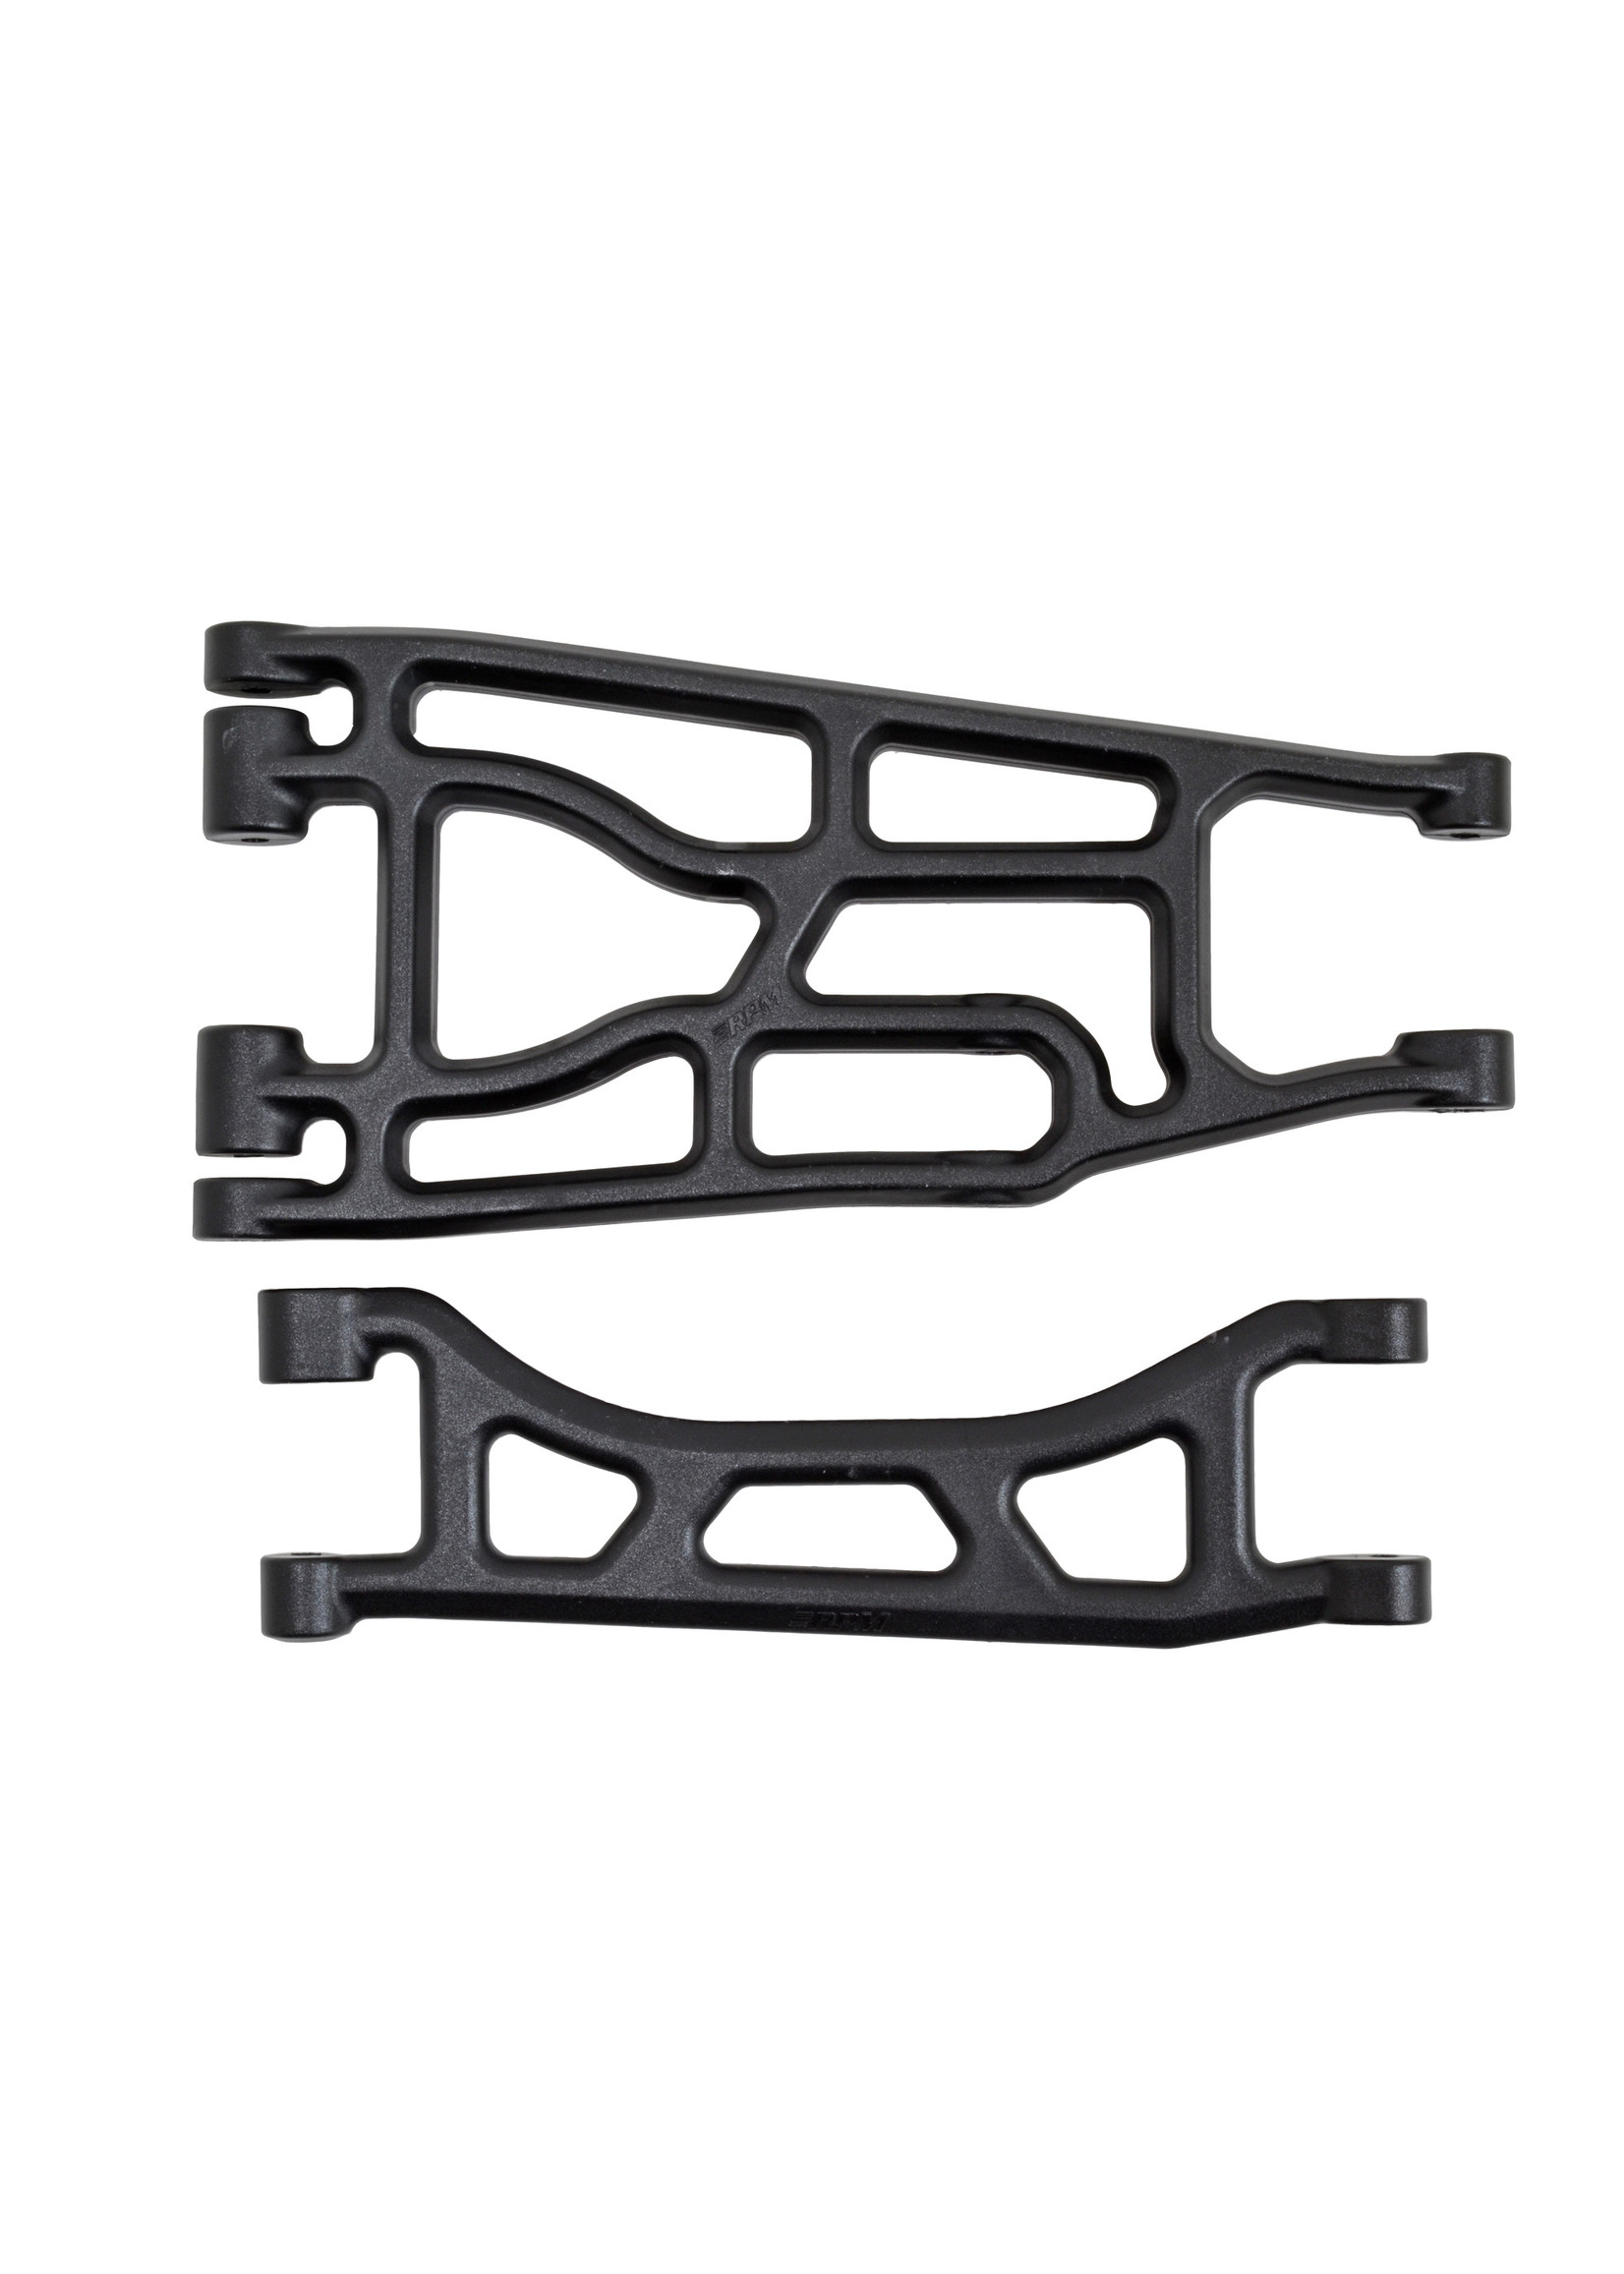 RPM 82352 - Upper/Lower A-arms for X-Maxx - Black